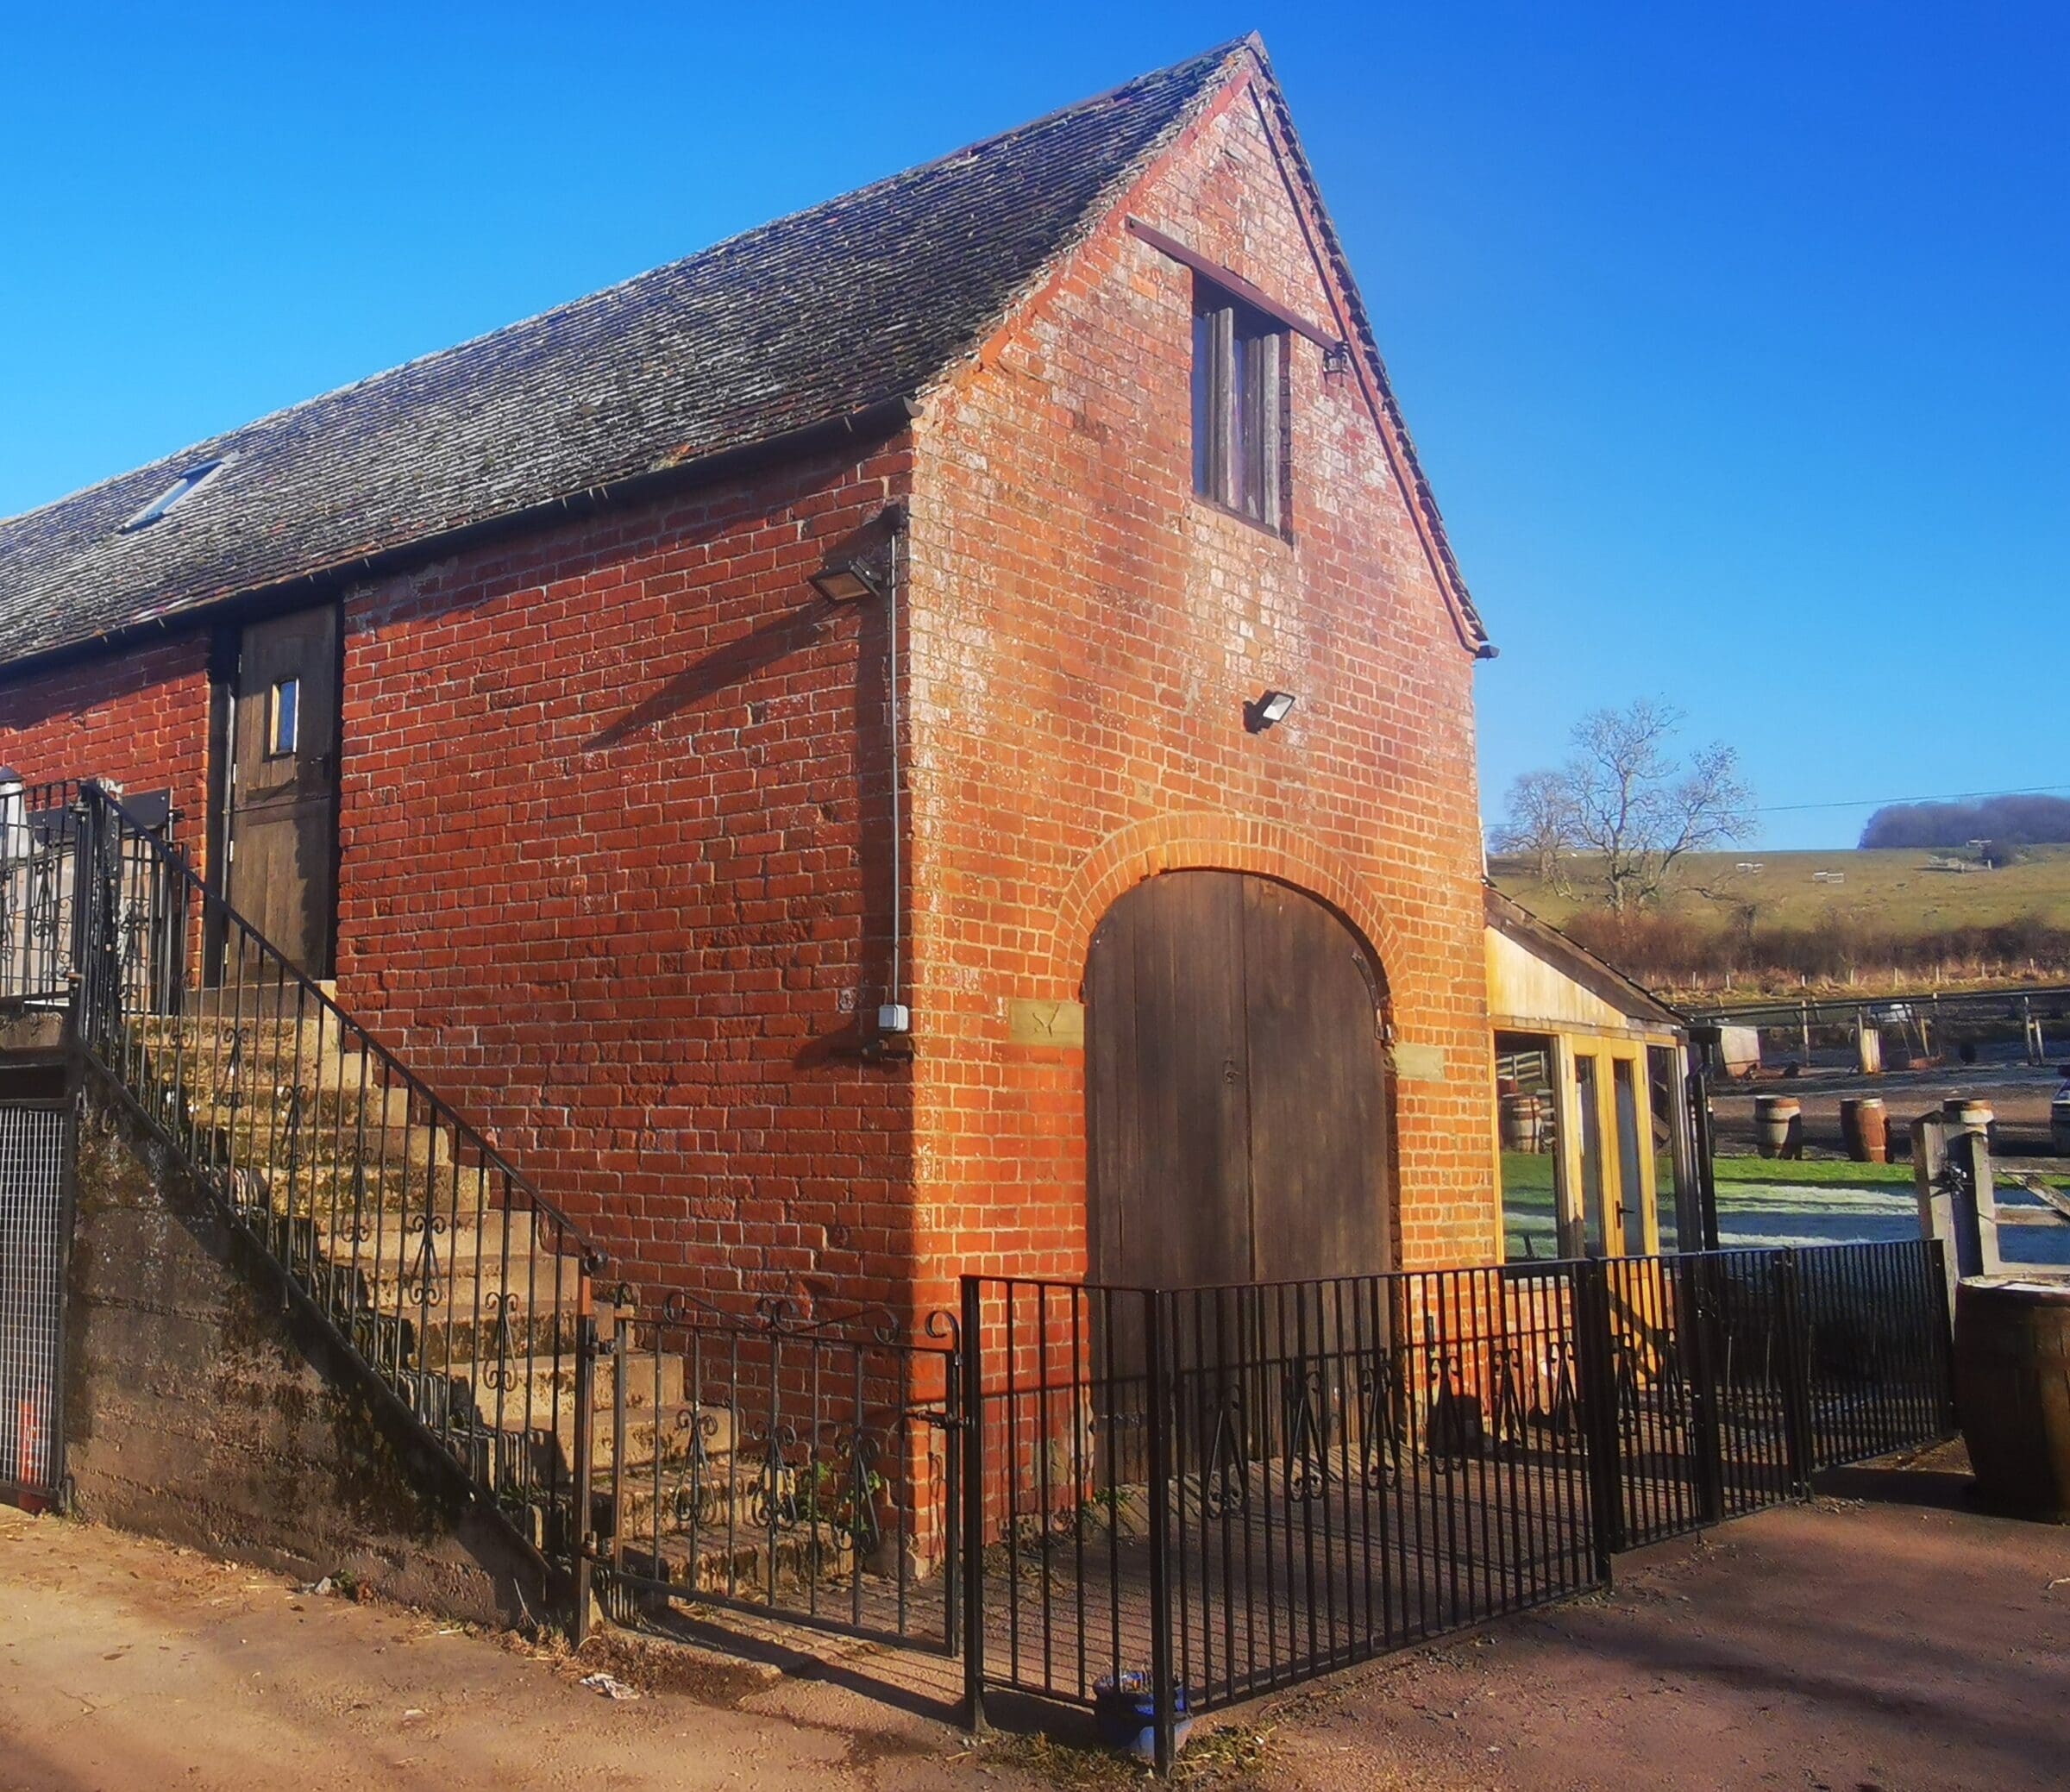 The Granary at Gwatkin Red Cow